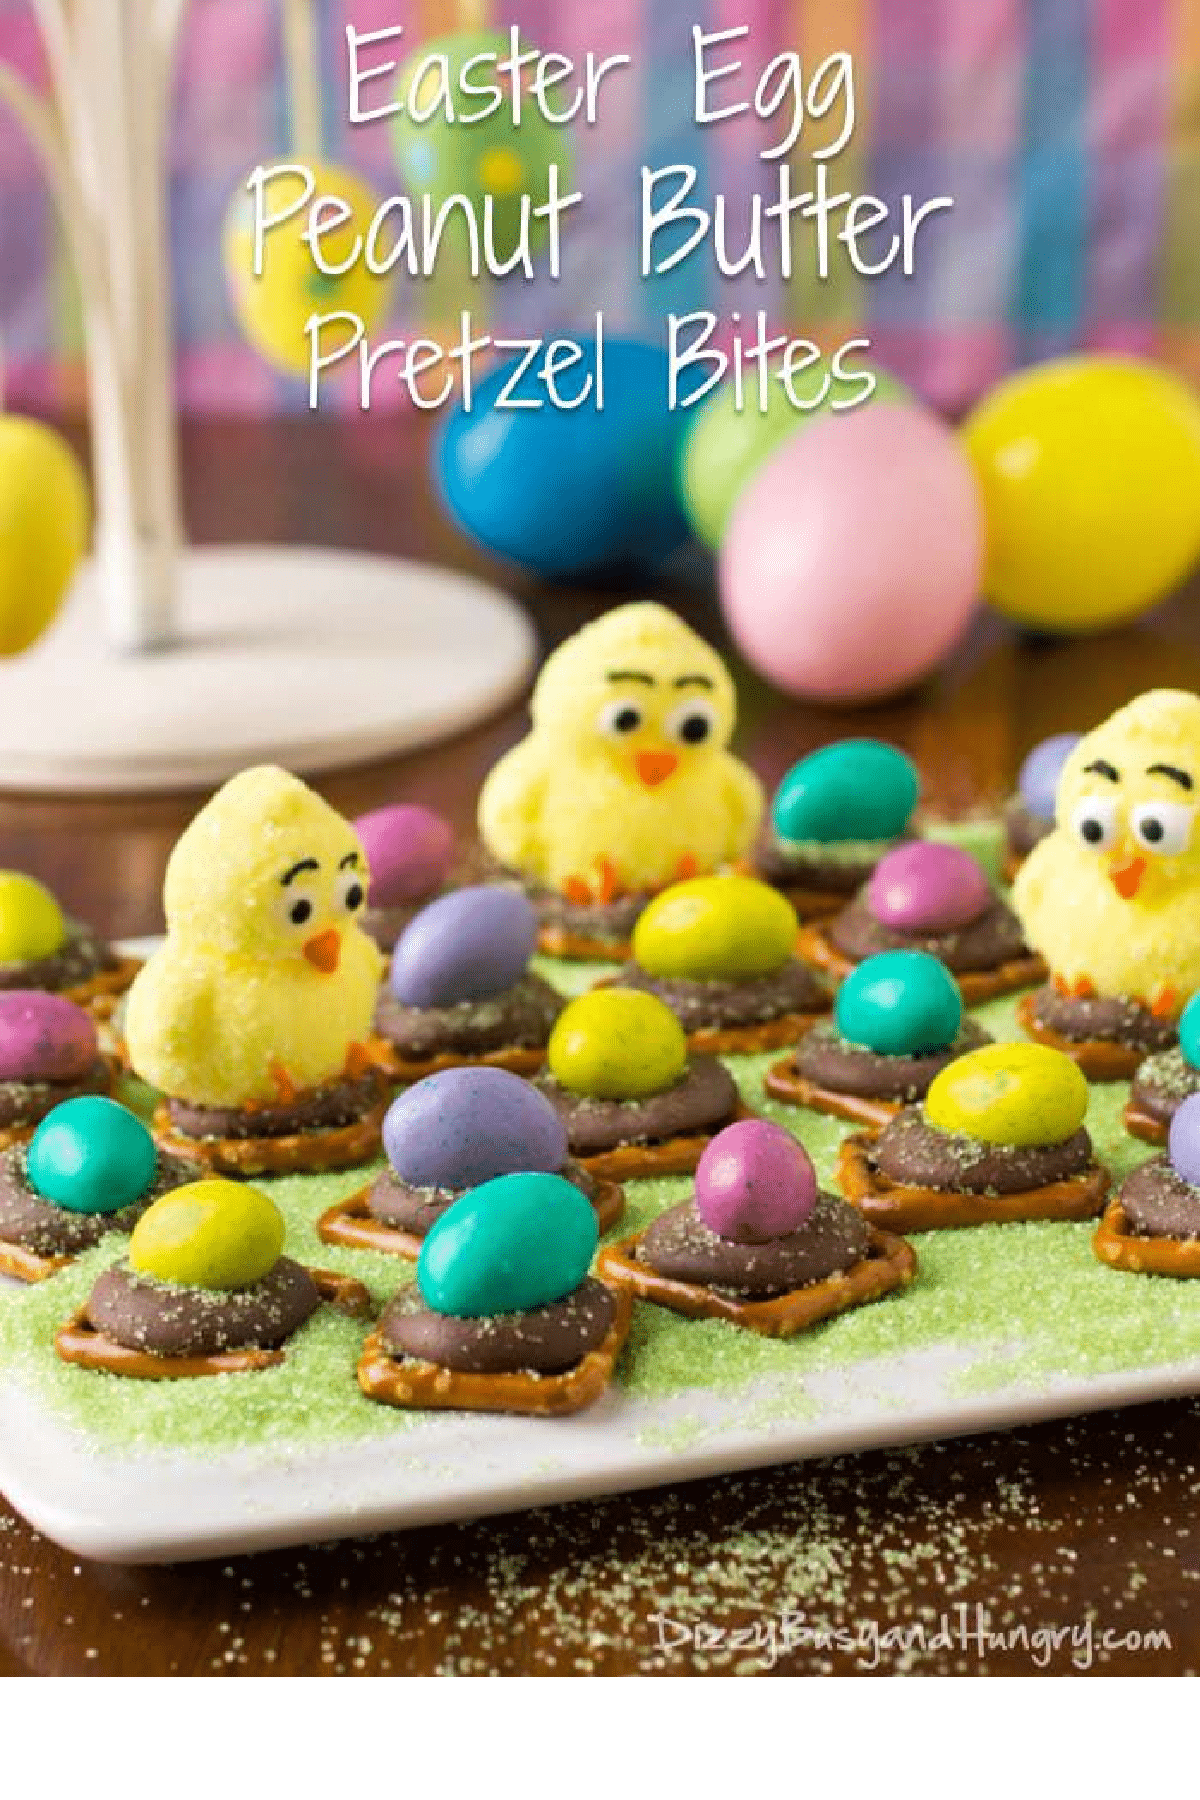 Easter Egg Peanut Butter Pretzel Bites on a plate with toy birds and mini-eggs on top.